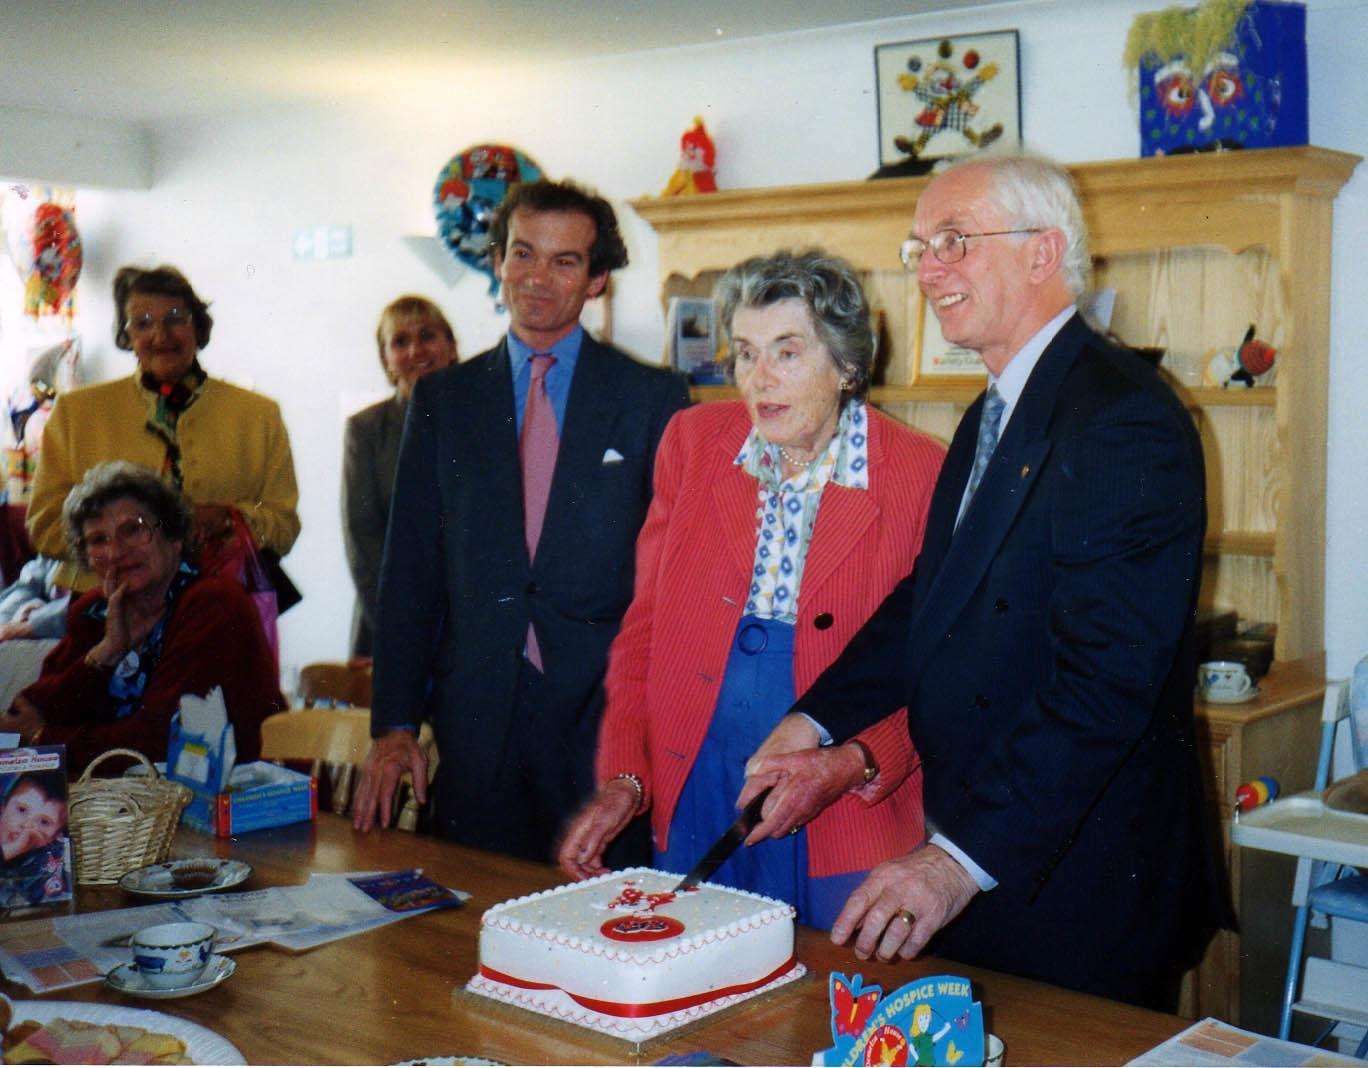 From left, Demelza vice president Richard Oldfield, the late Patricia Knatchbull, 2nd Countess Mountbatten of Burma, and Demelza's father Derek Phillips